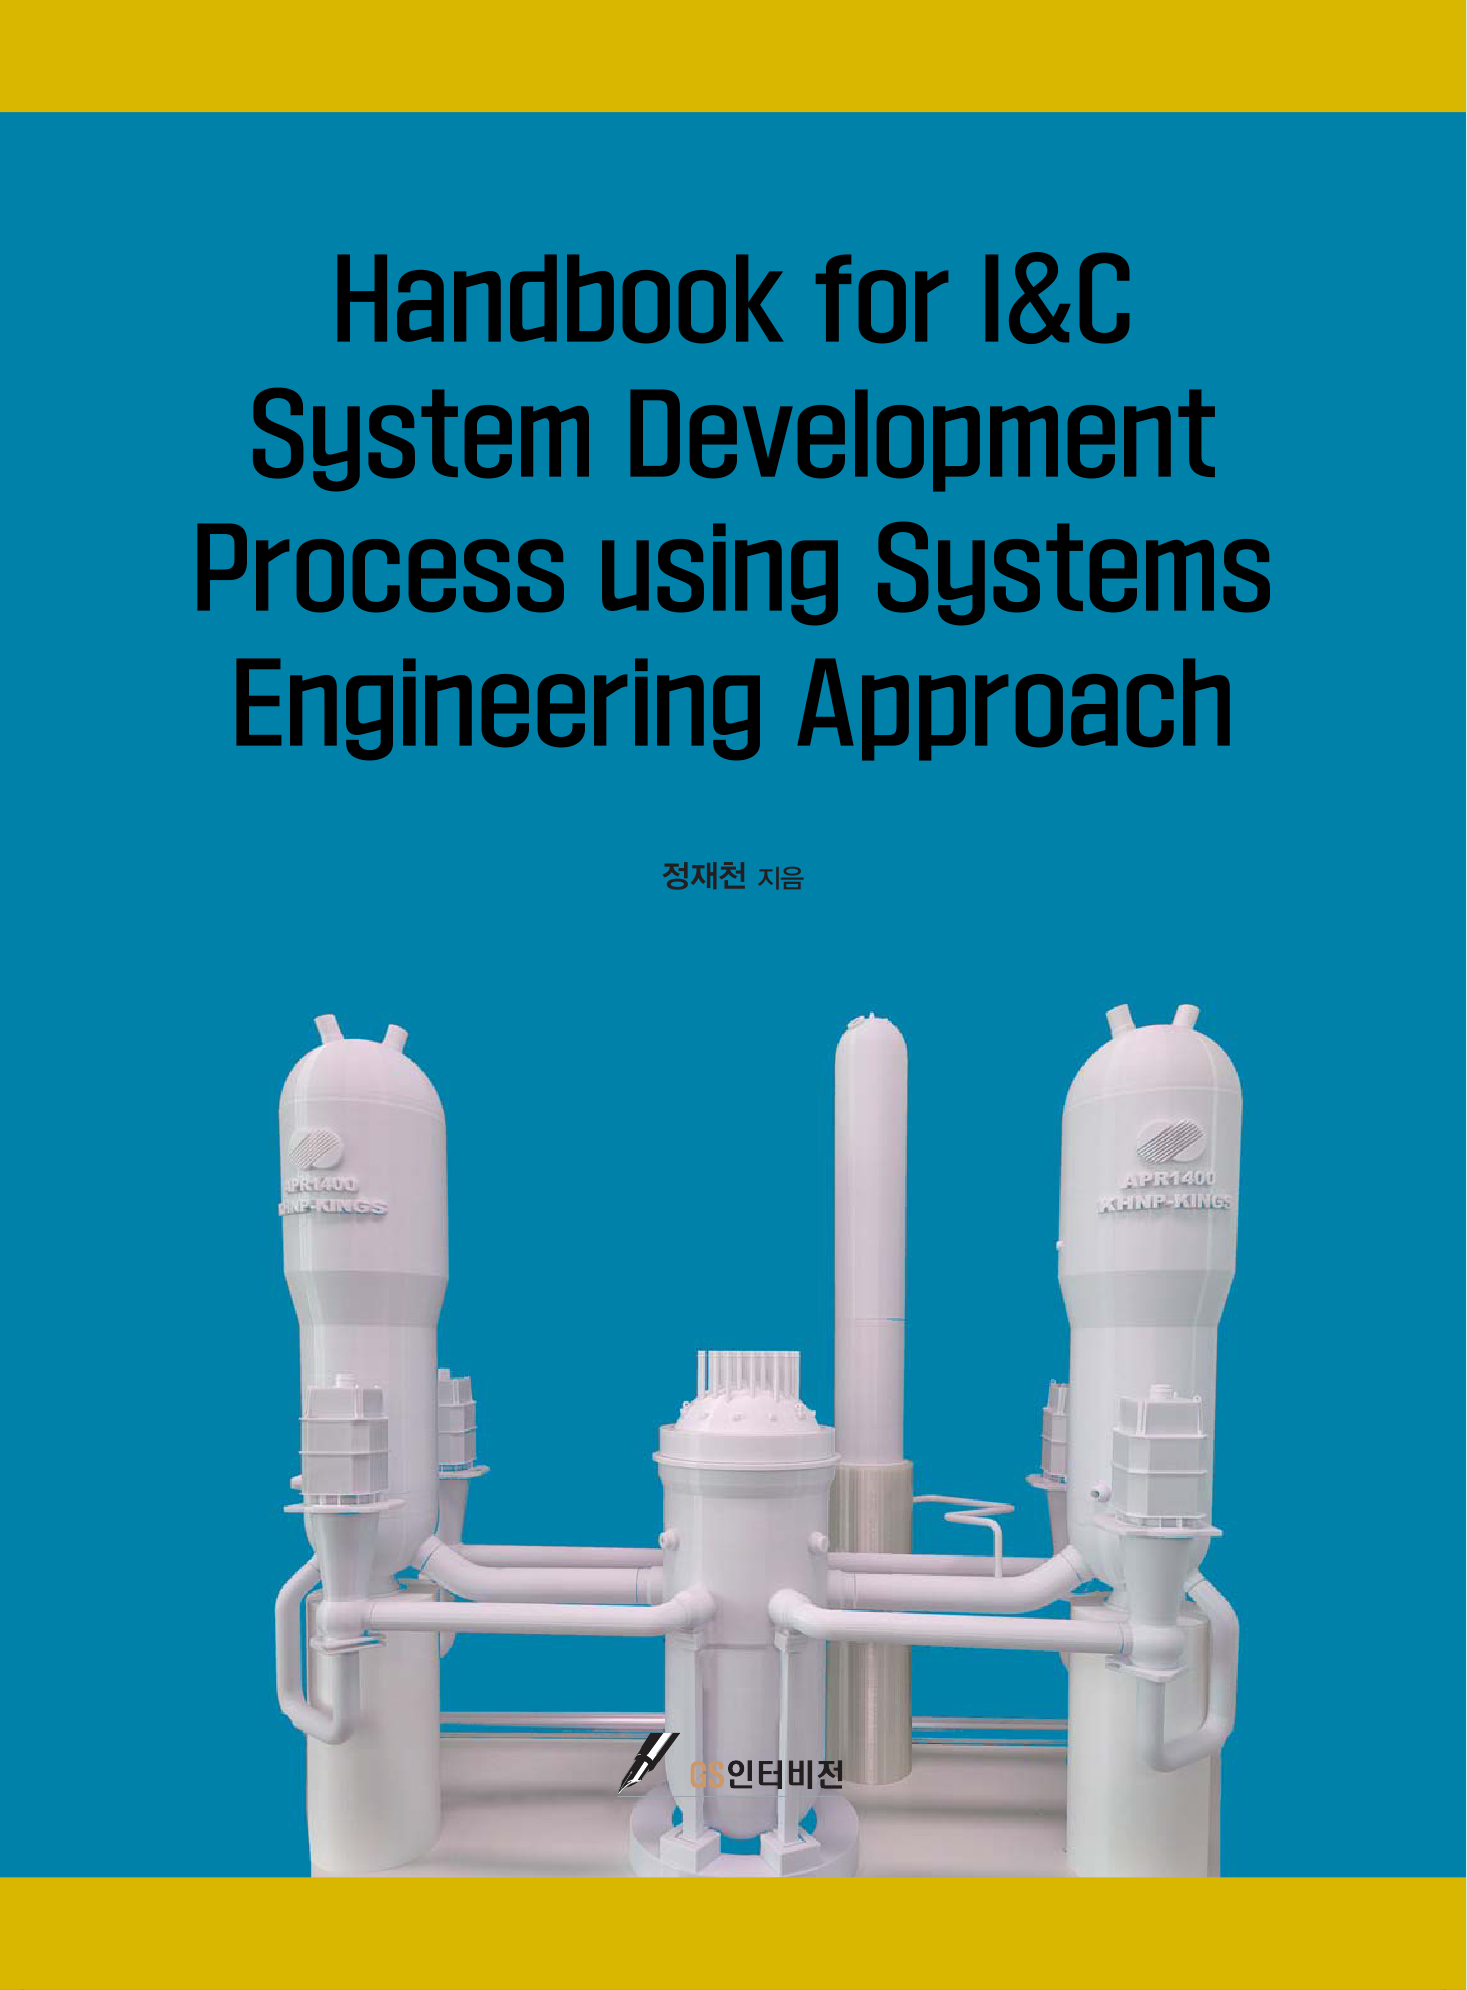 Handbook for I&C System Development Process using Systems Engineering Approach